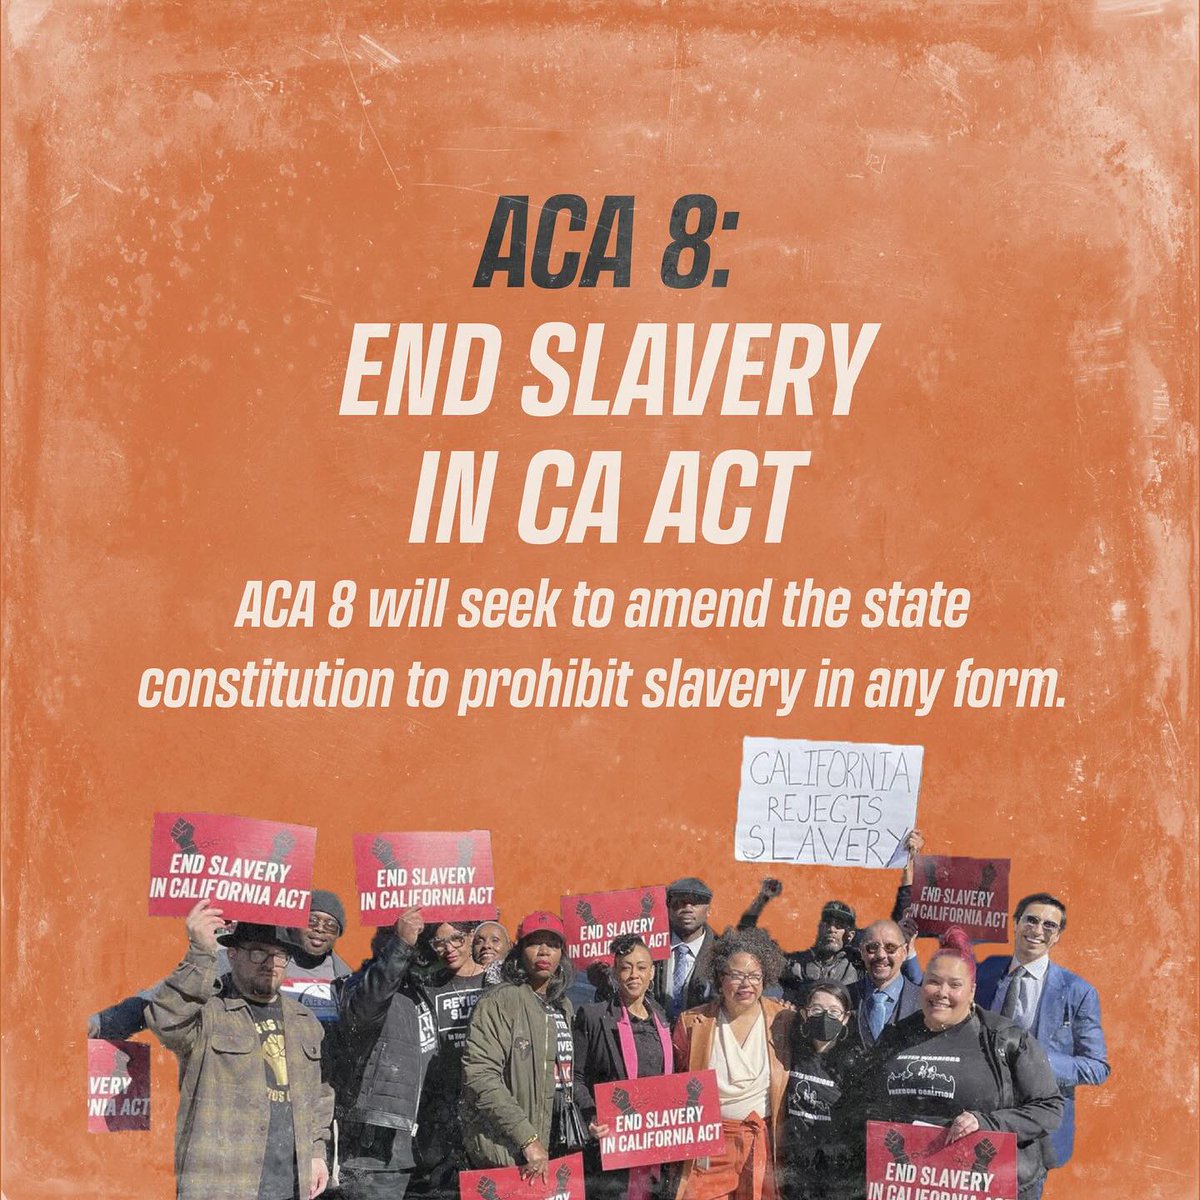 We're still fighting to #EndSlaveryinCA. Modern-day slavery has no place in California. It's time to pass #ACA8 in the CA Senate!